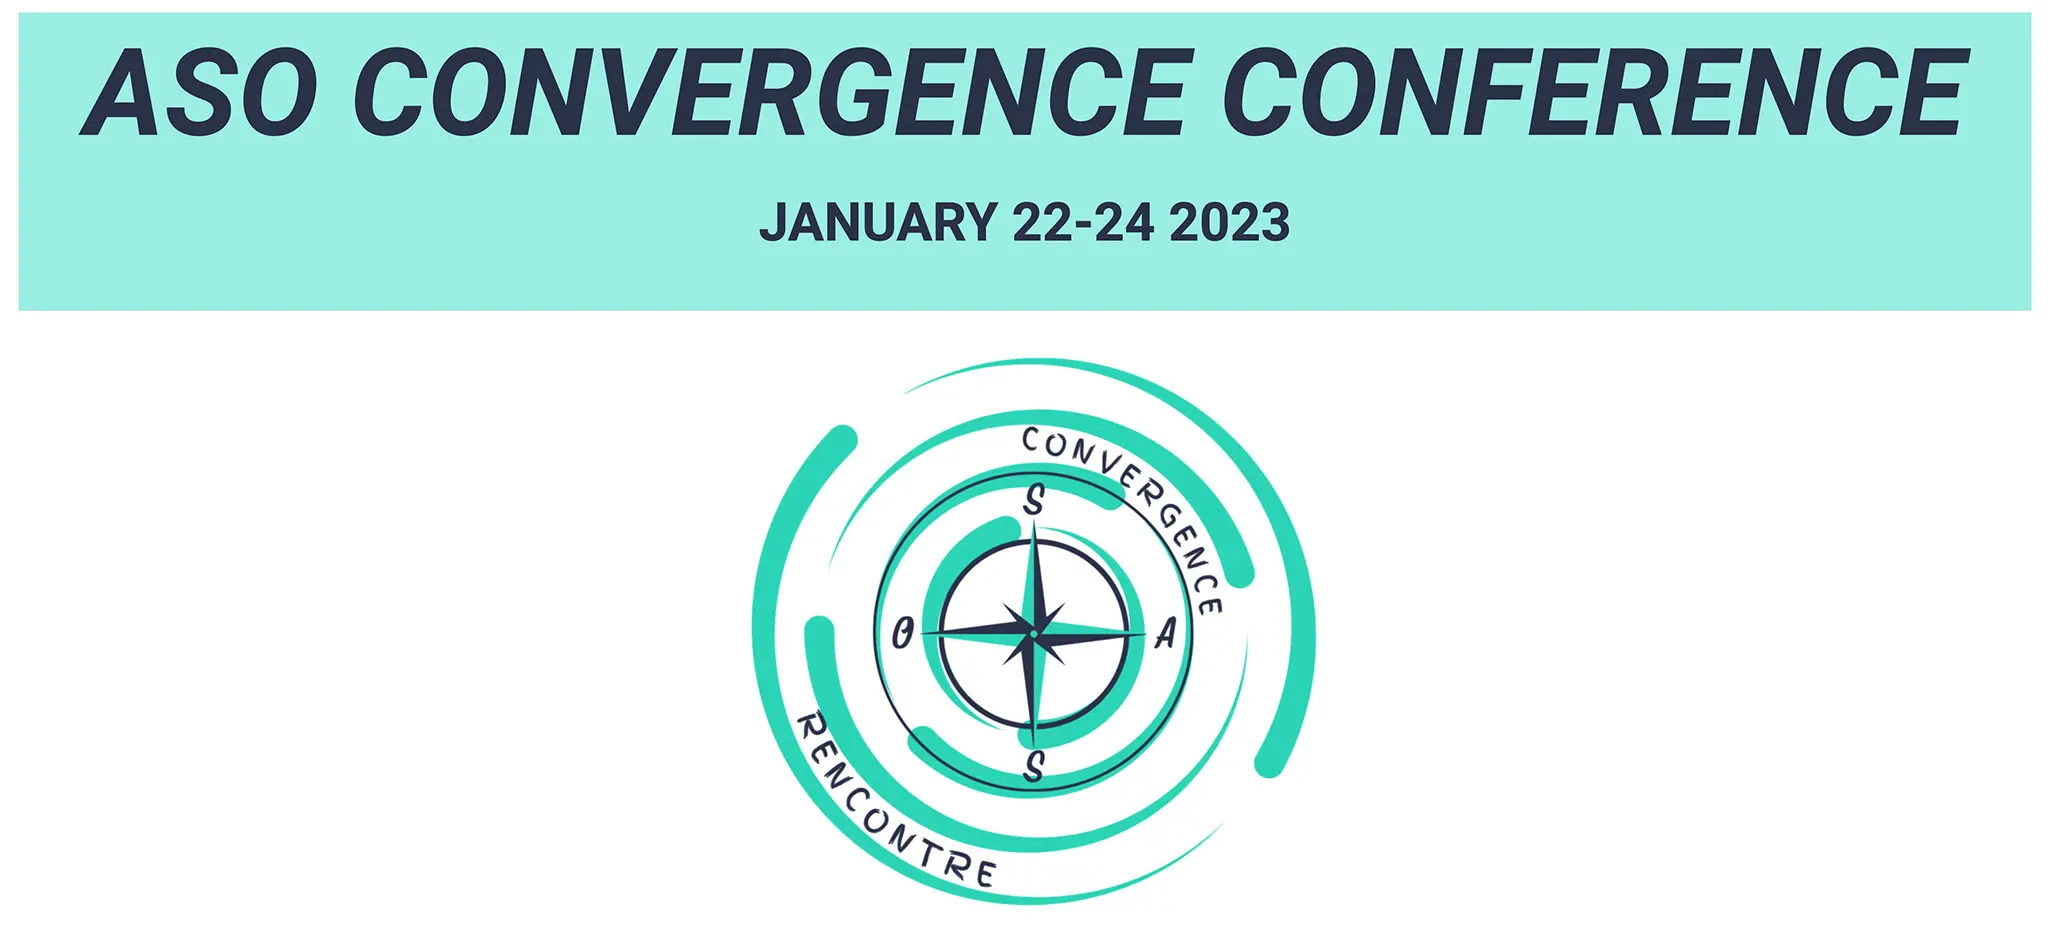 ASO Convergence Conference